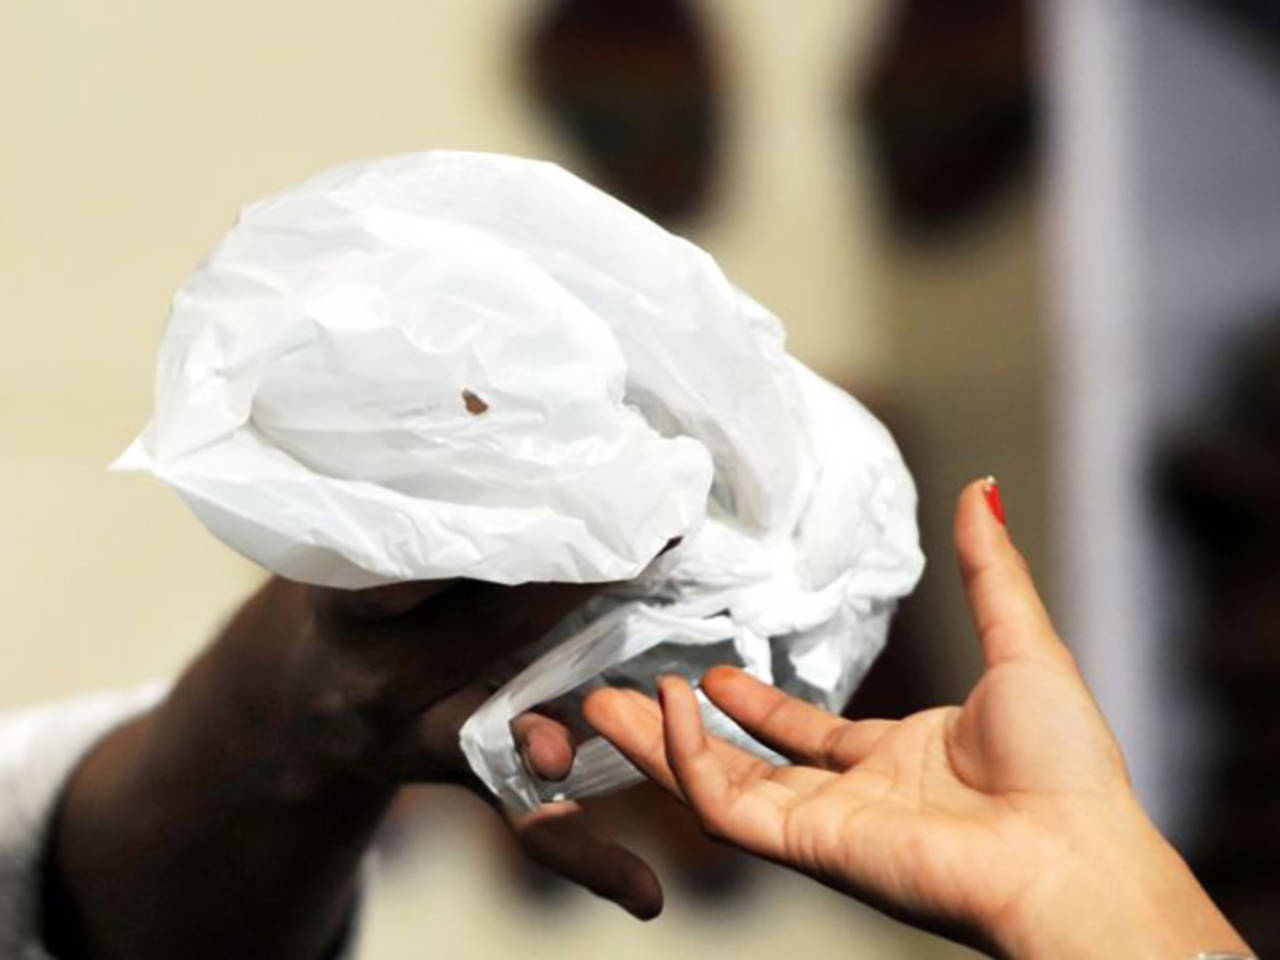 Couple uses plastic bag instead of a condom, ends up in hospital